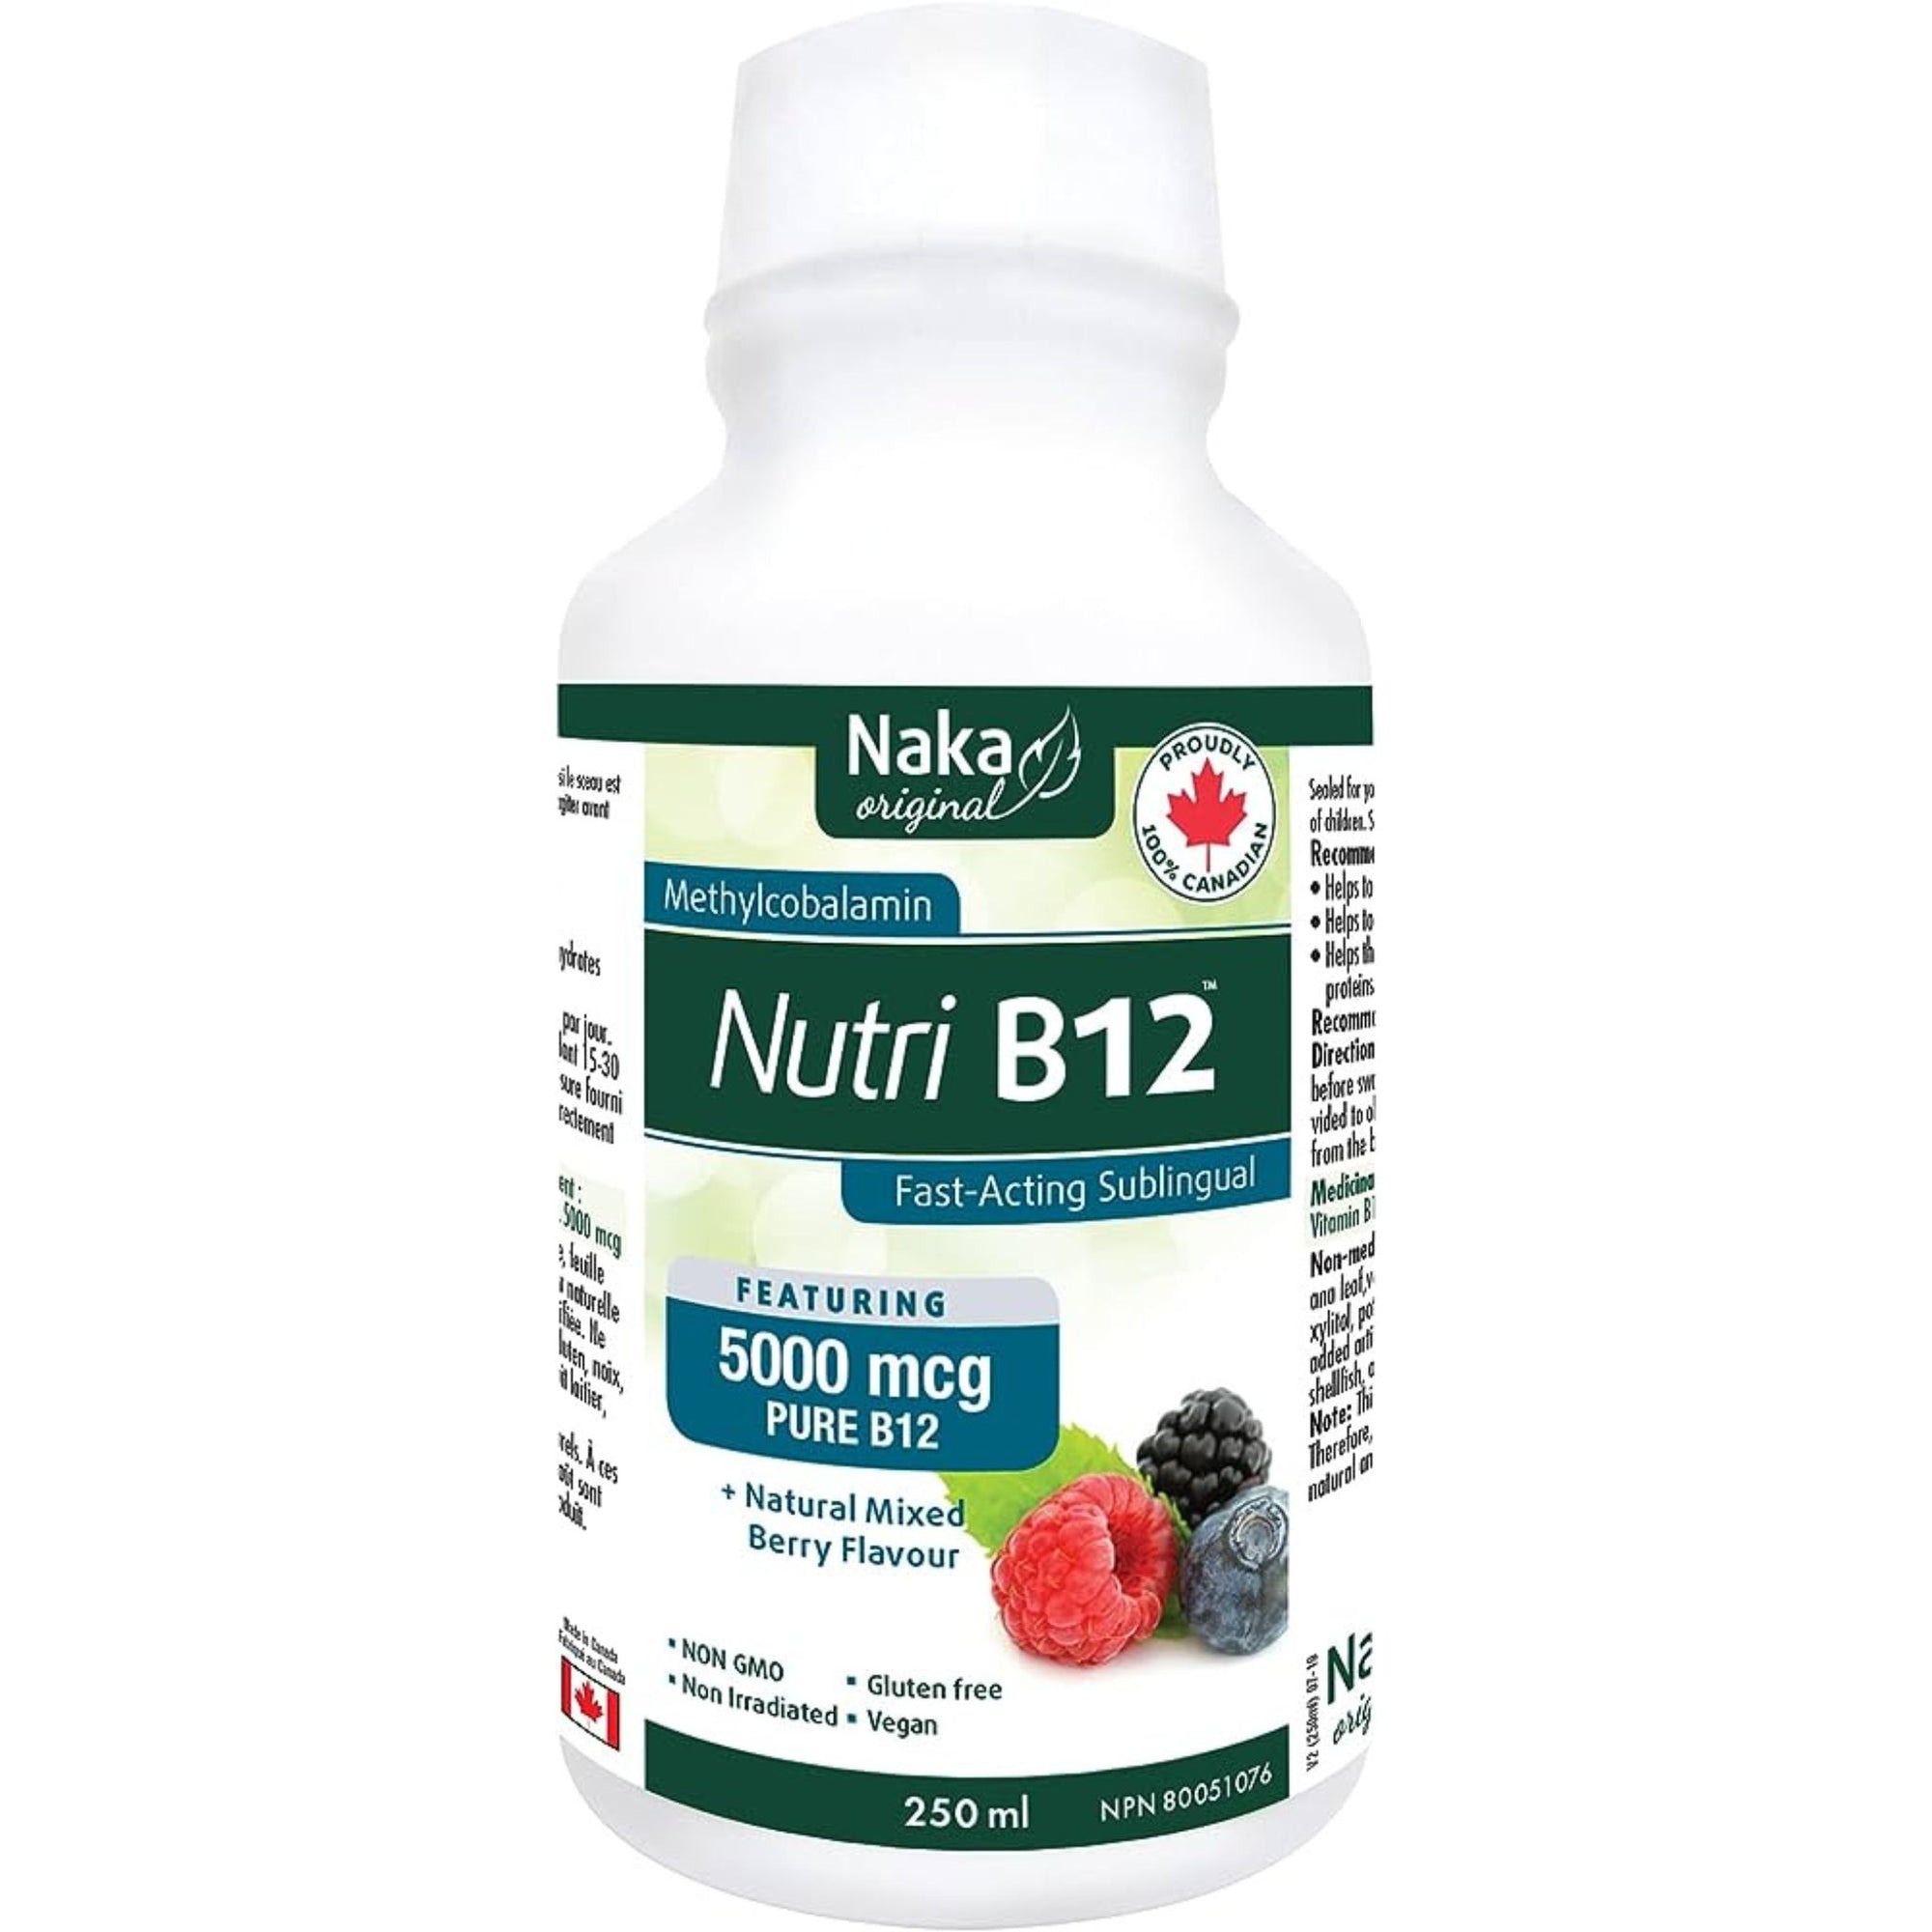 Naka Nutri B12 250ml - Fast-acting Sublingual vitamin B12 supplement in its methylcobalamin form. A natural mixed berry flavour. 